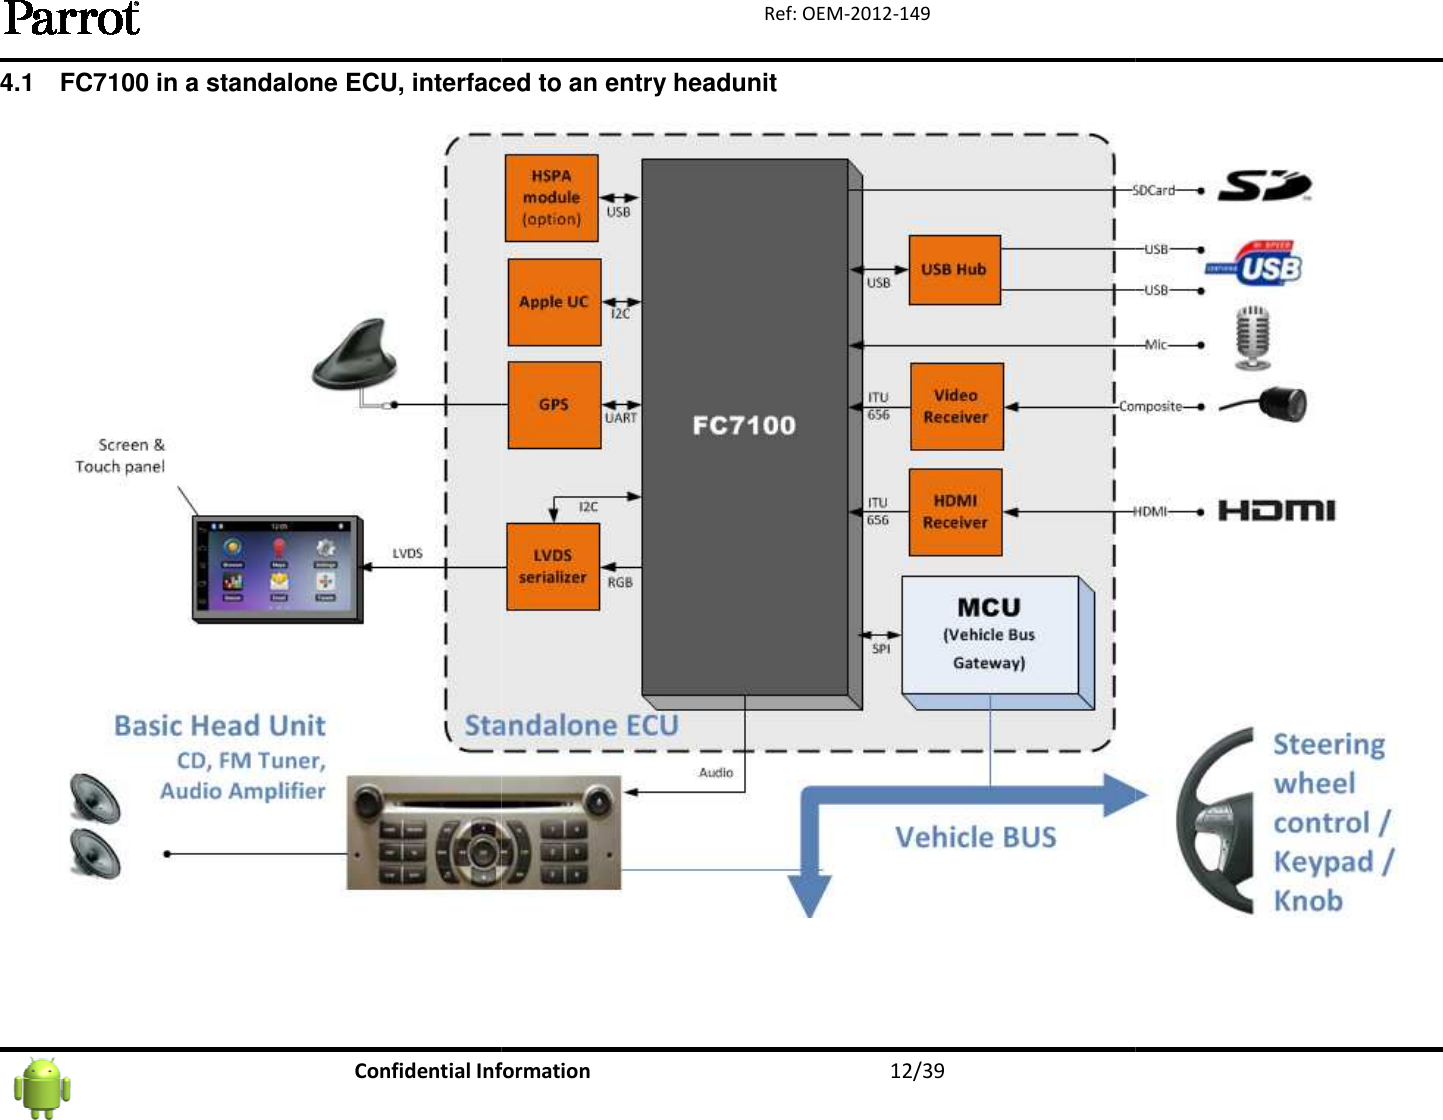   Confidential Information4.1 FC7100 in a standalone ECU, interfaced to an entry headunit Information  12/39 Ref: OEM-2012-149 FC7100 in a standalone ECU, interfaced to an entry headunit    